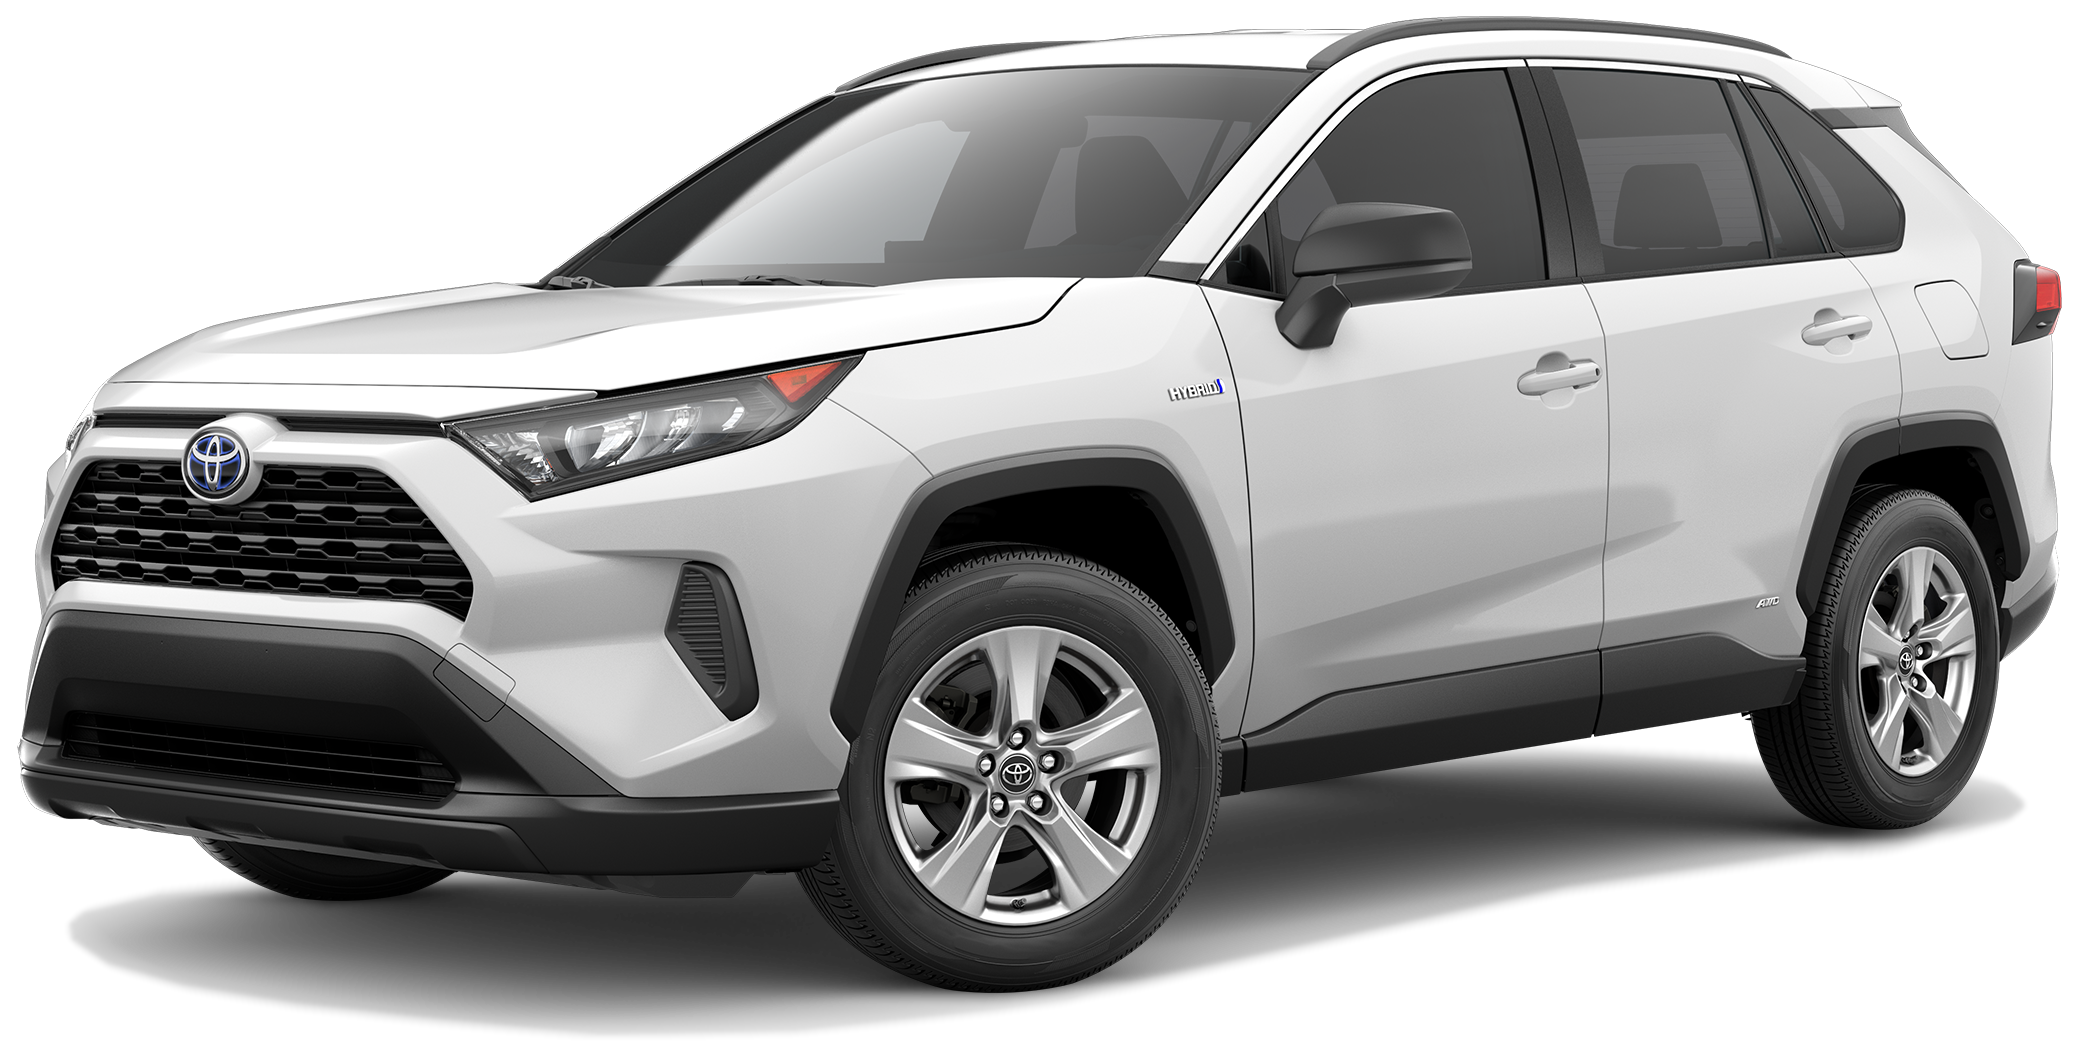 2020 Toyota RAV4 Hybrid Incentives, Specials & Offers in Duluth GA